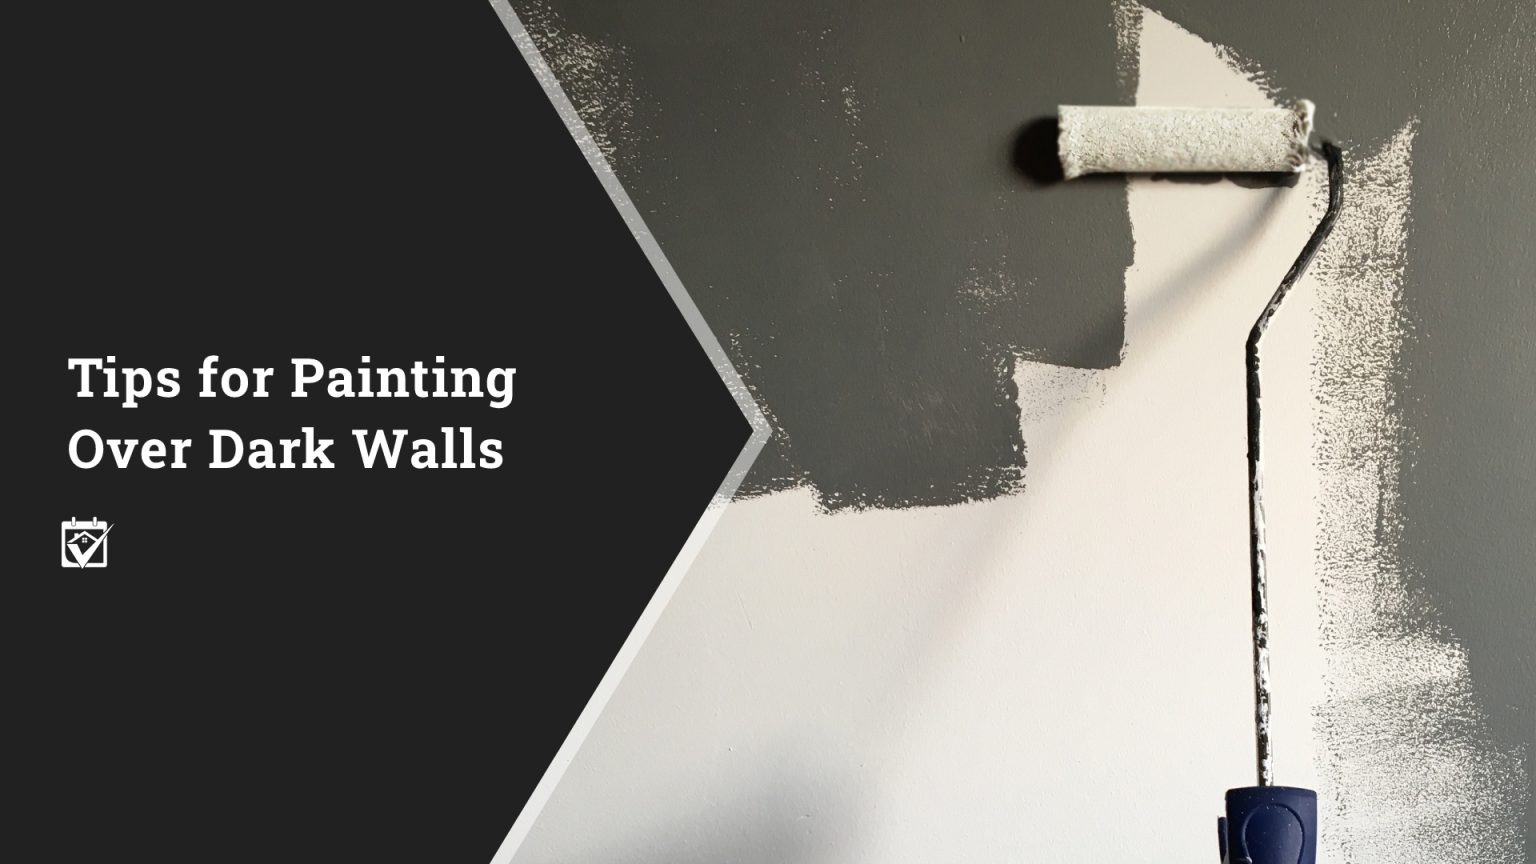 Tips for Painting Over Dark Walls